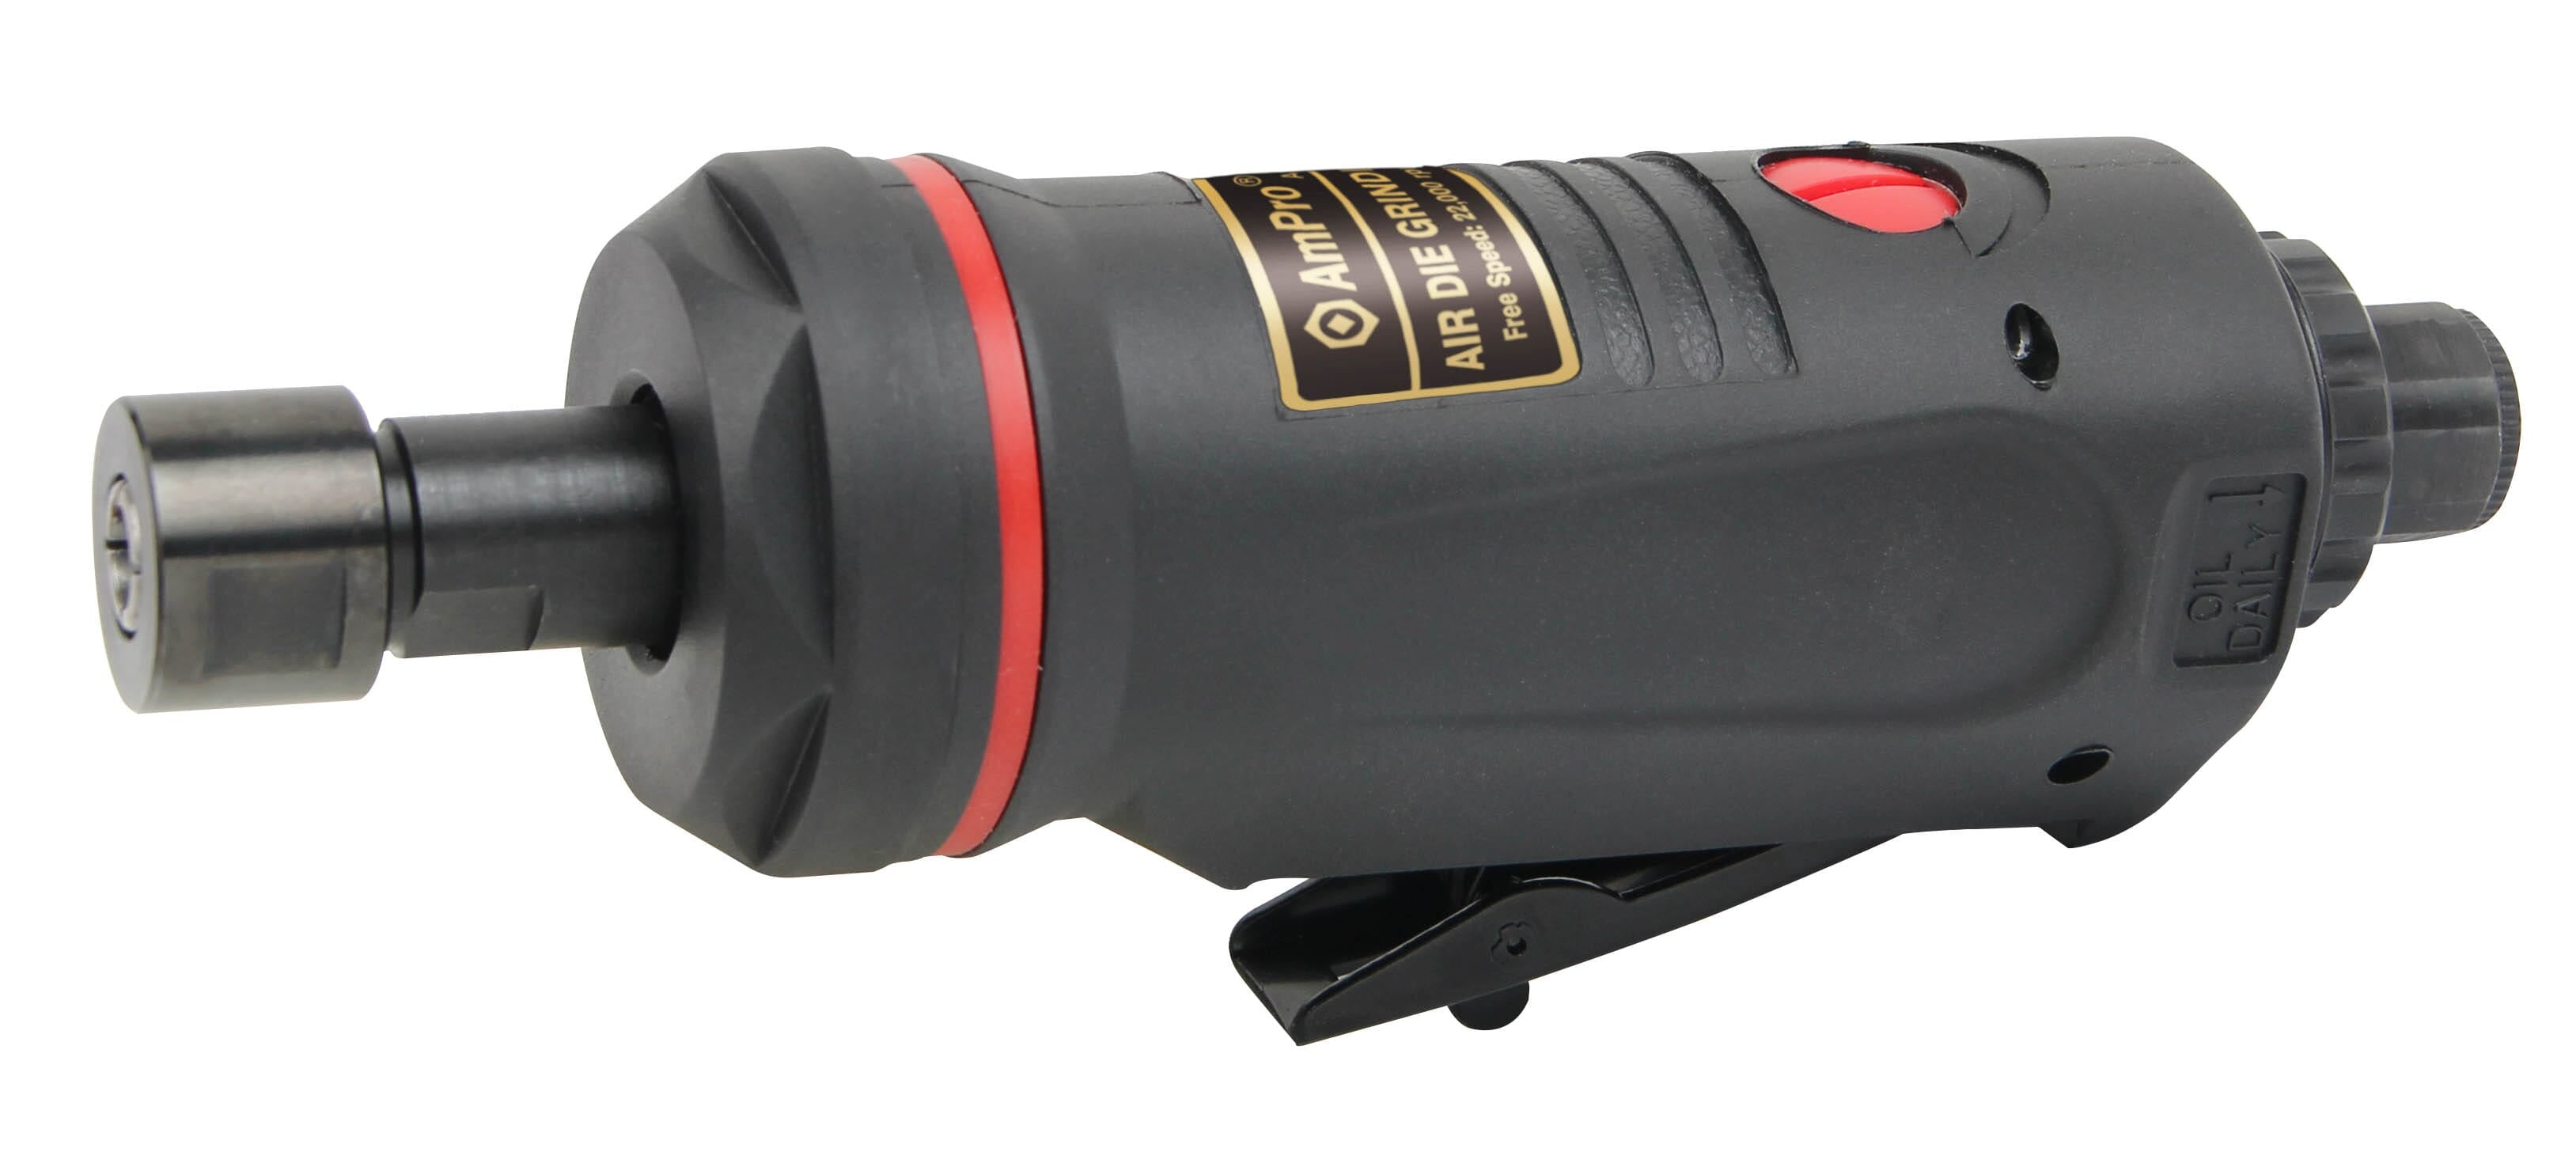 Ampro Heavy Duty Air Die Grinder With 6Mm And 1/4" Collets